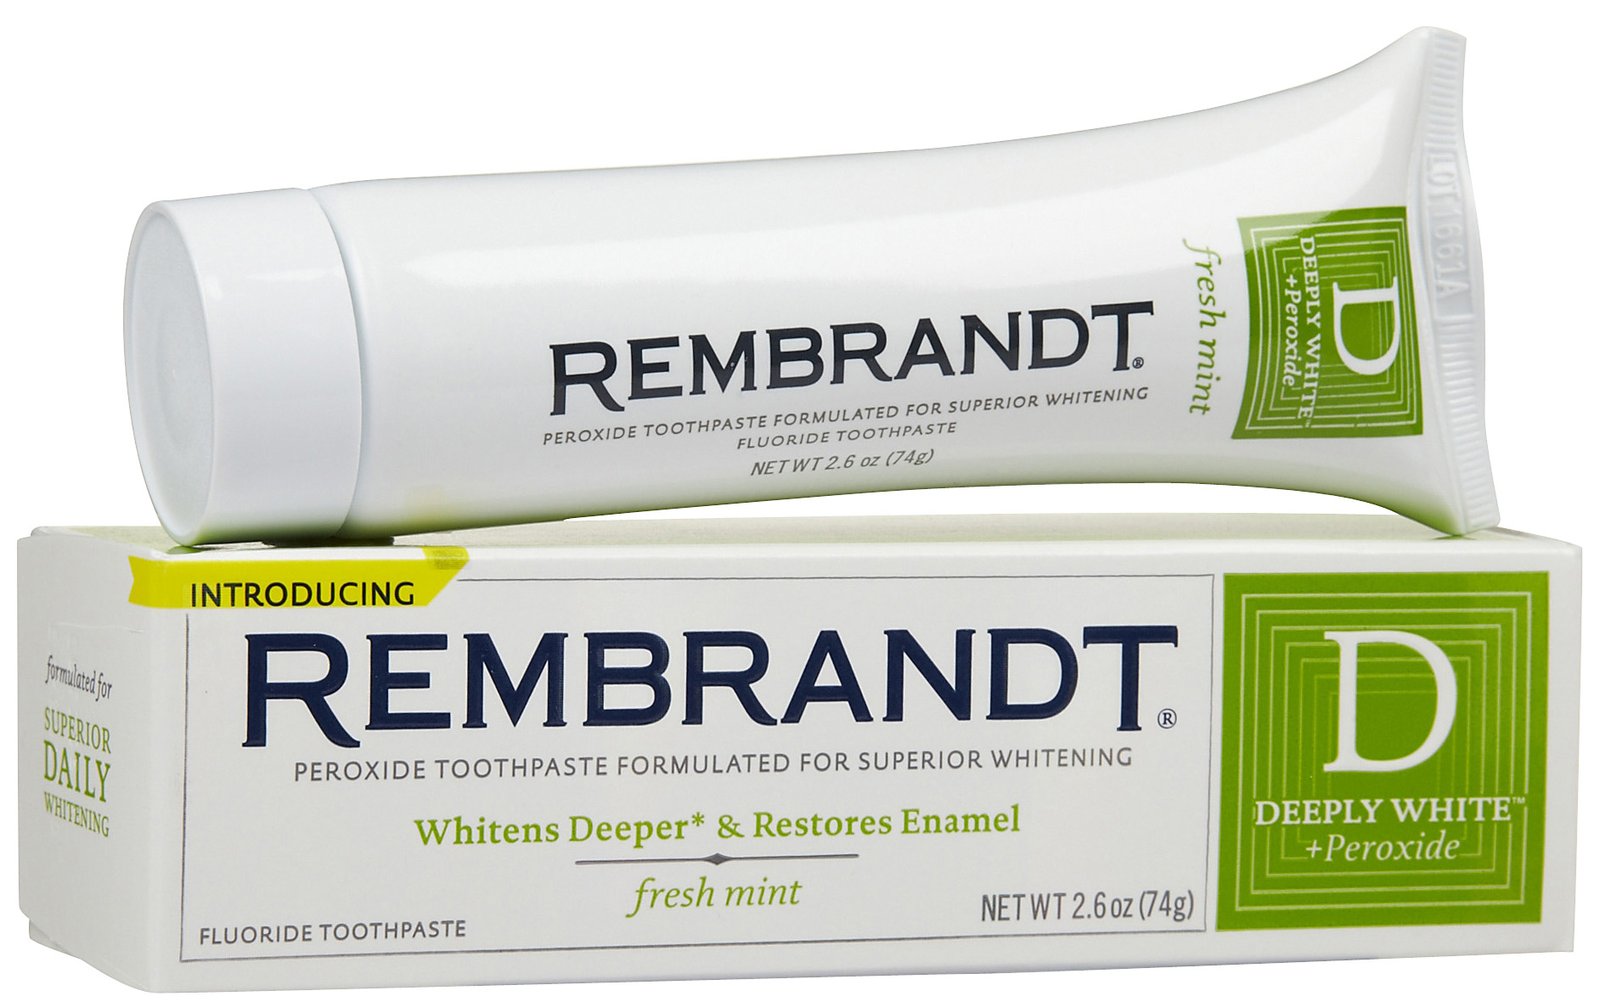 Rembrandt Deeply White Toothpaste Only $2.55 at Target